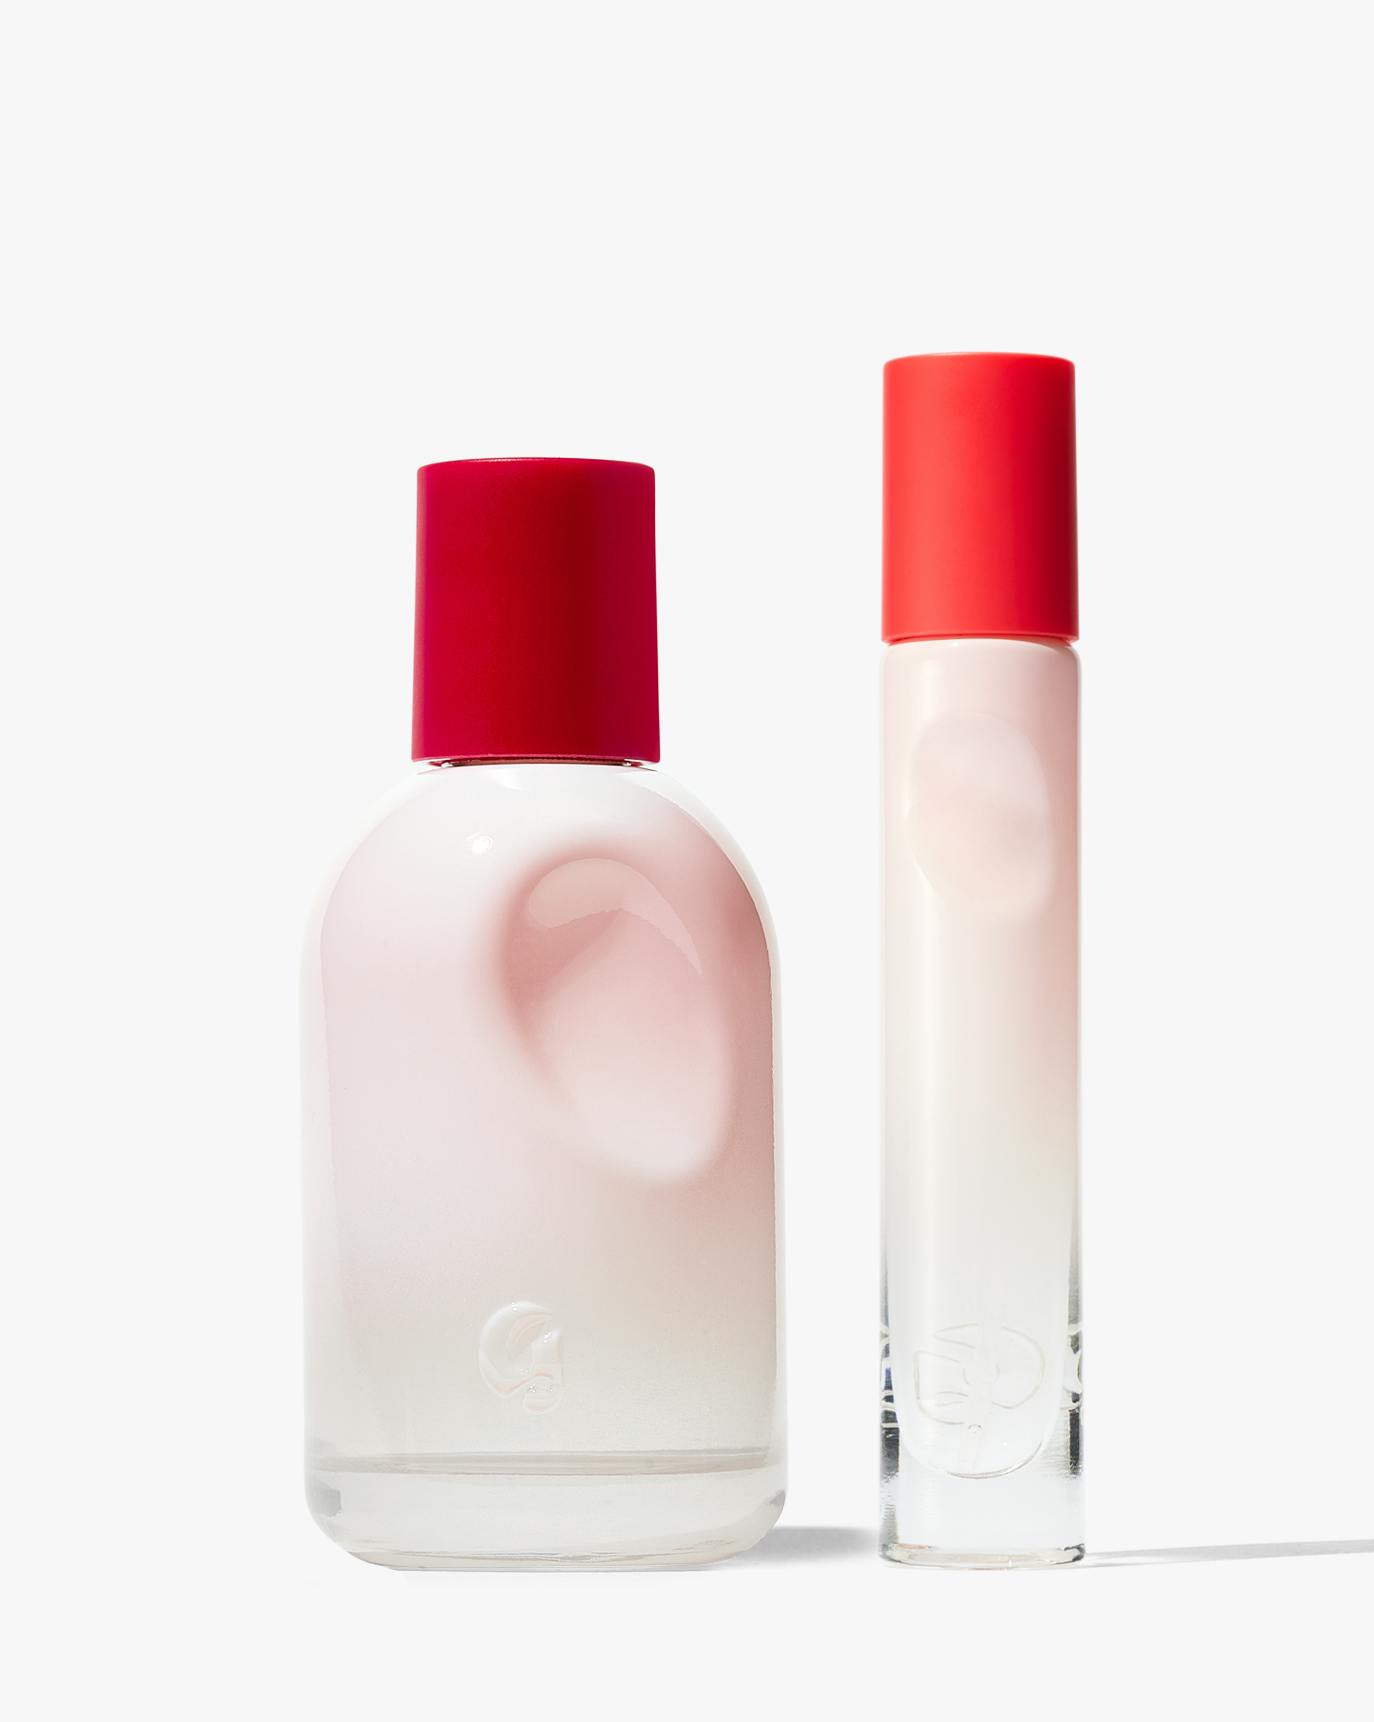 Glossier you. two ways